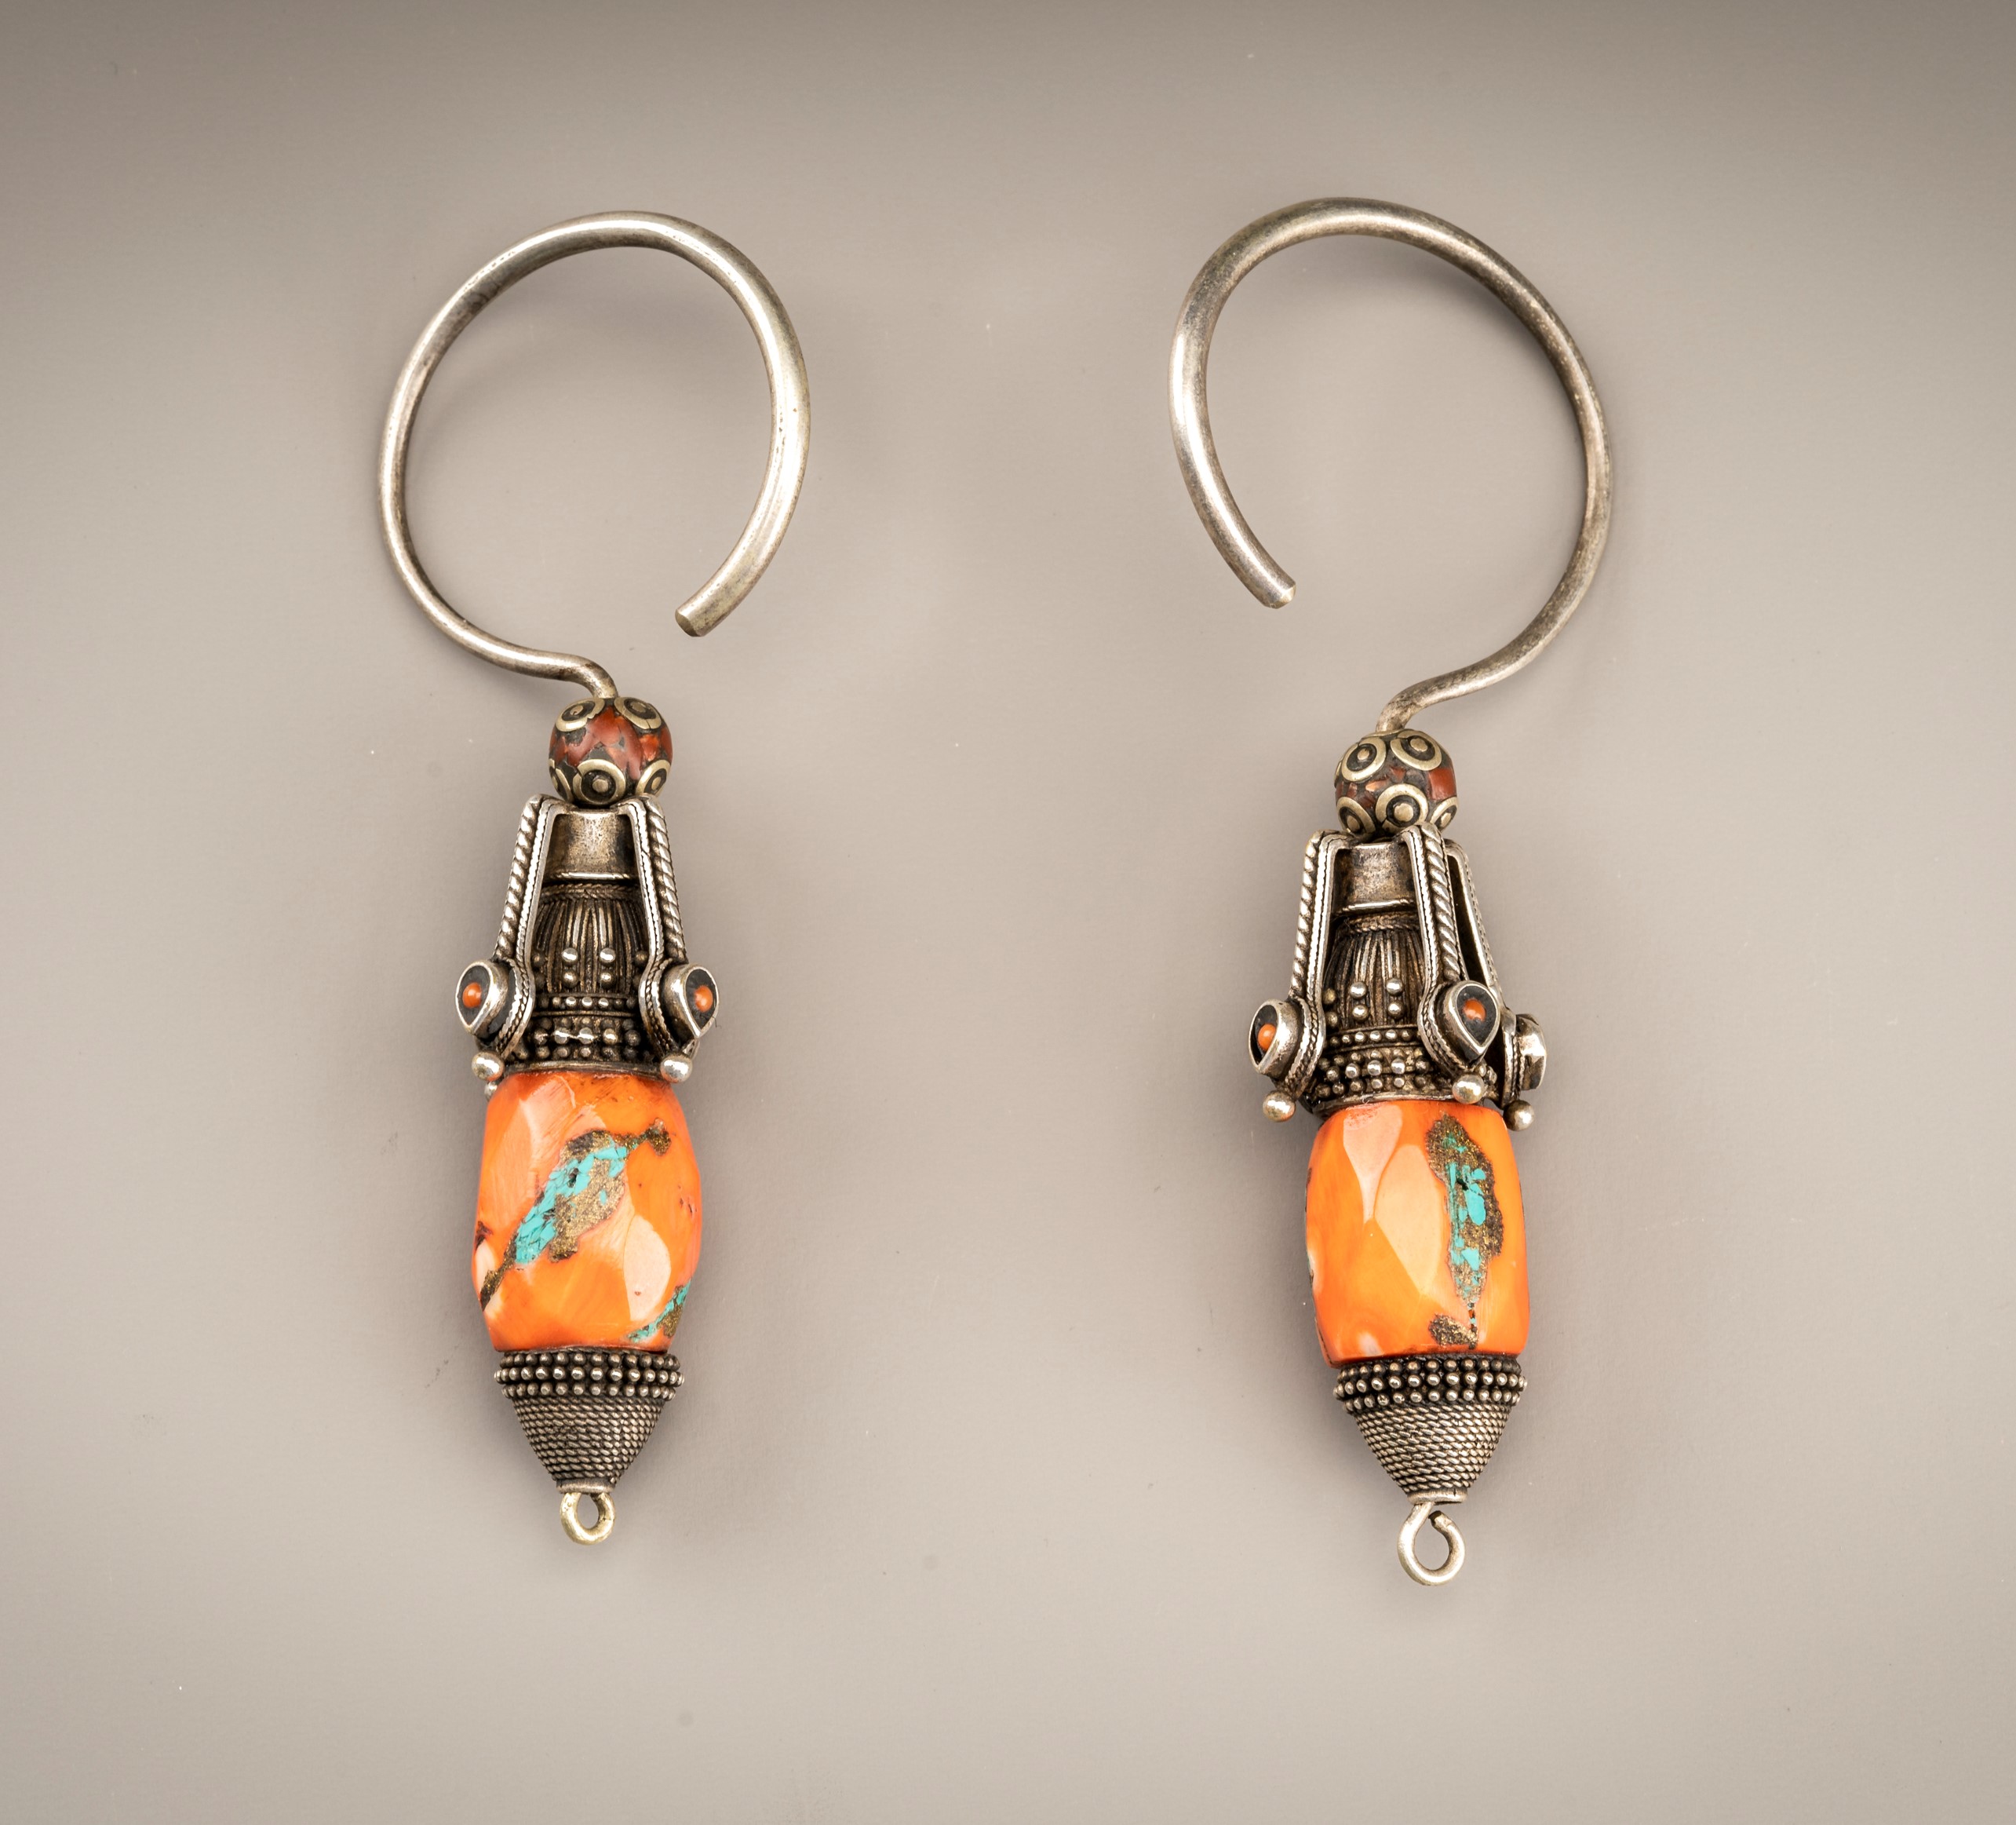 A PAIR OF CORAL AND TURQUOISE SET METAL EARRINGS, c. 1880s